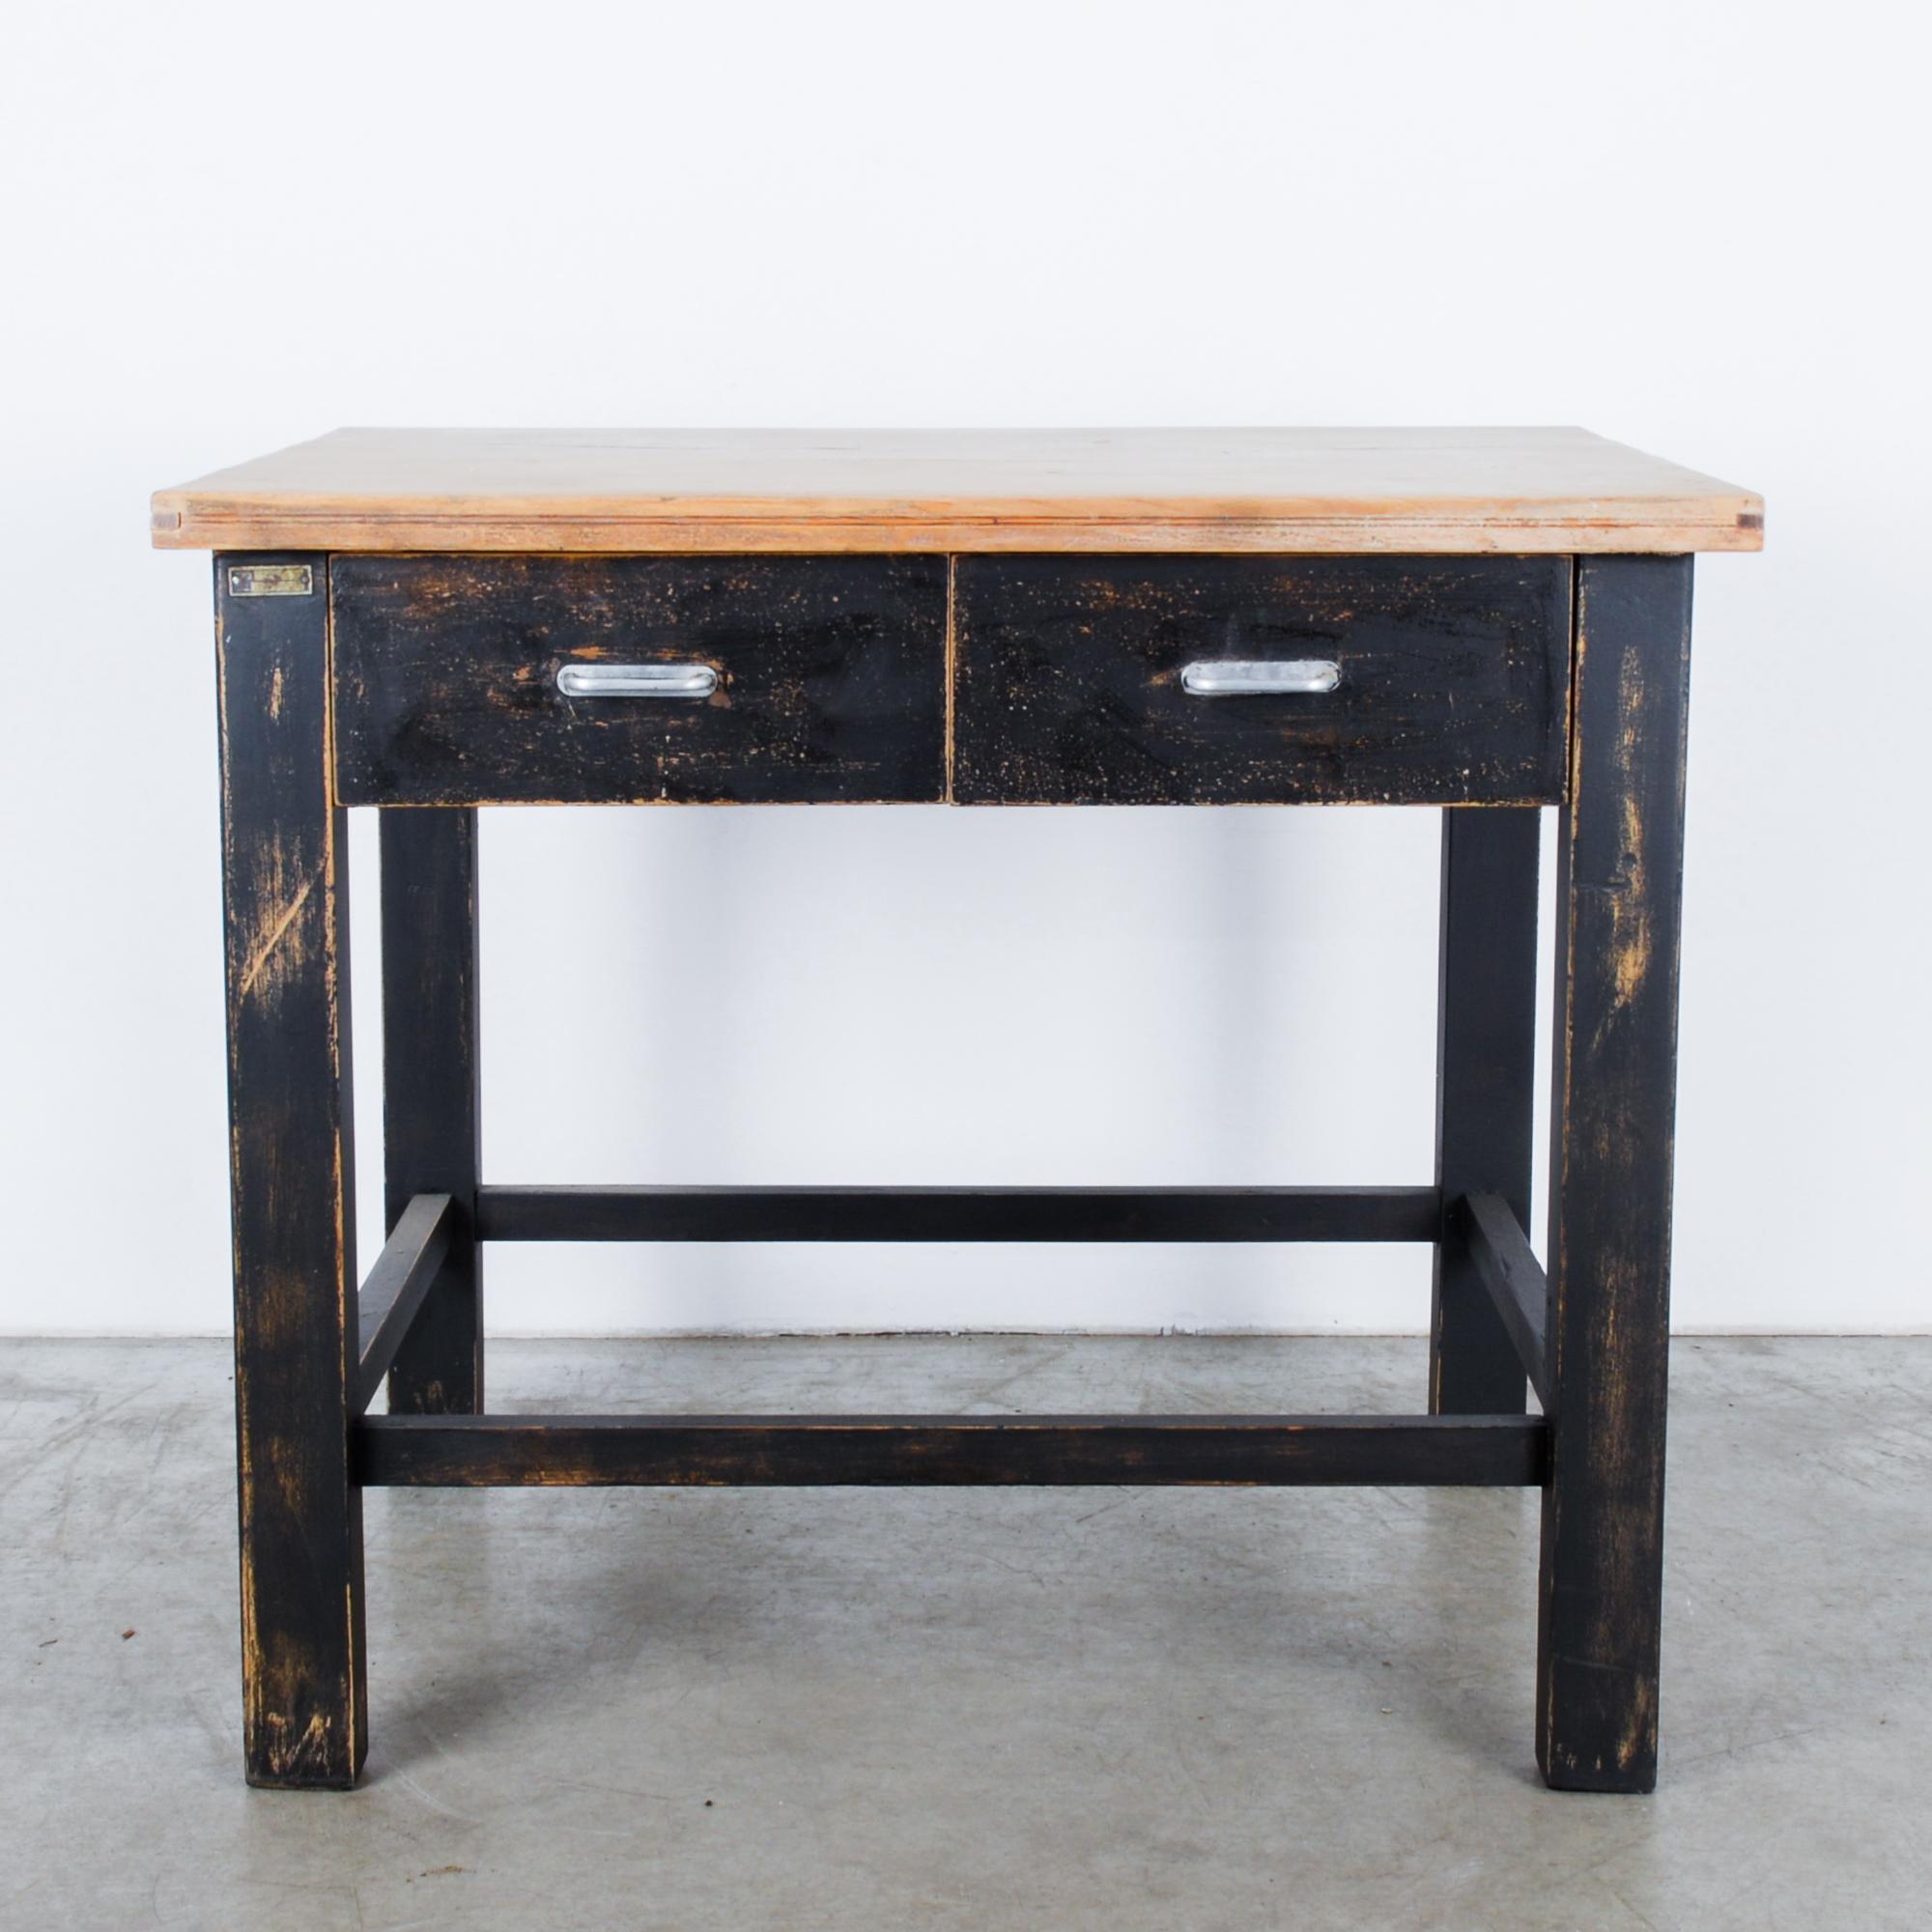 A black patinated wood occasional table from Central Europe, circa 1980. Great for a studio or working space, its double drawers with metal pulls makes it a perfect side table. Bold, heavy furniture started to make a comeback in the 1980s, here